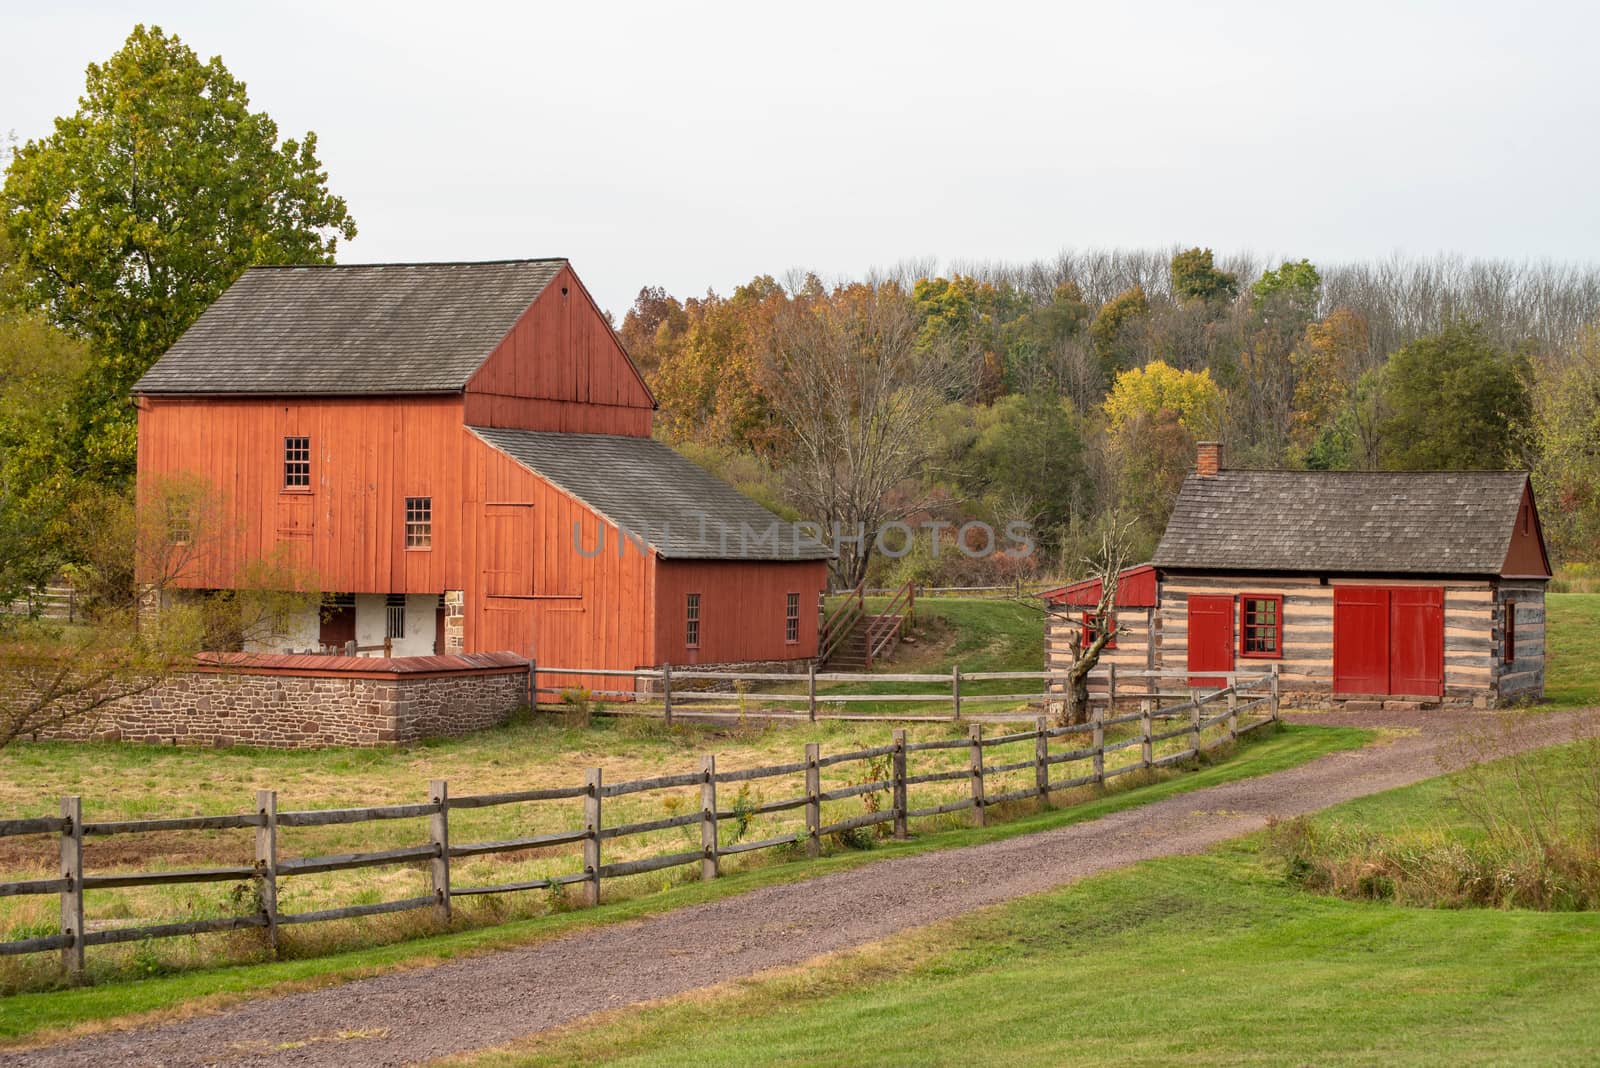 Red barn and log cabin at historic Daniel Boone Homestead by marysalen